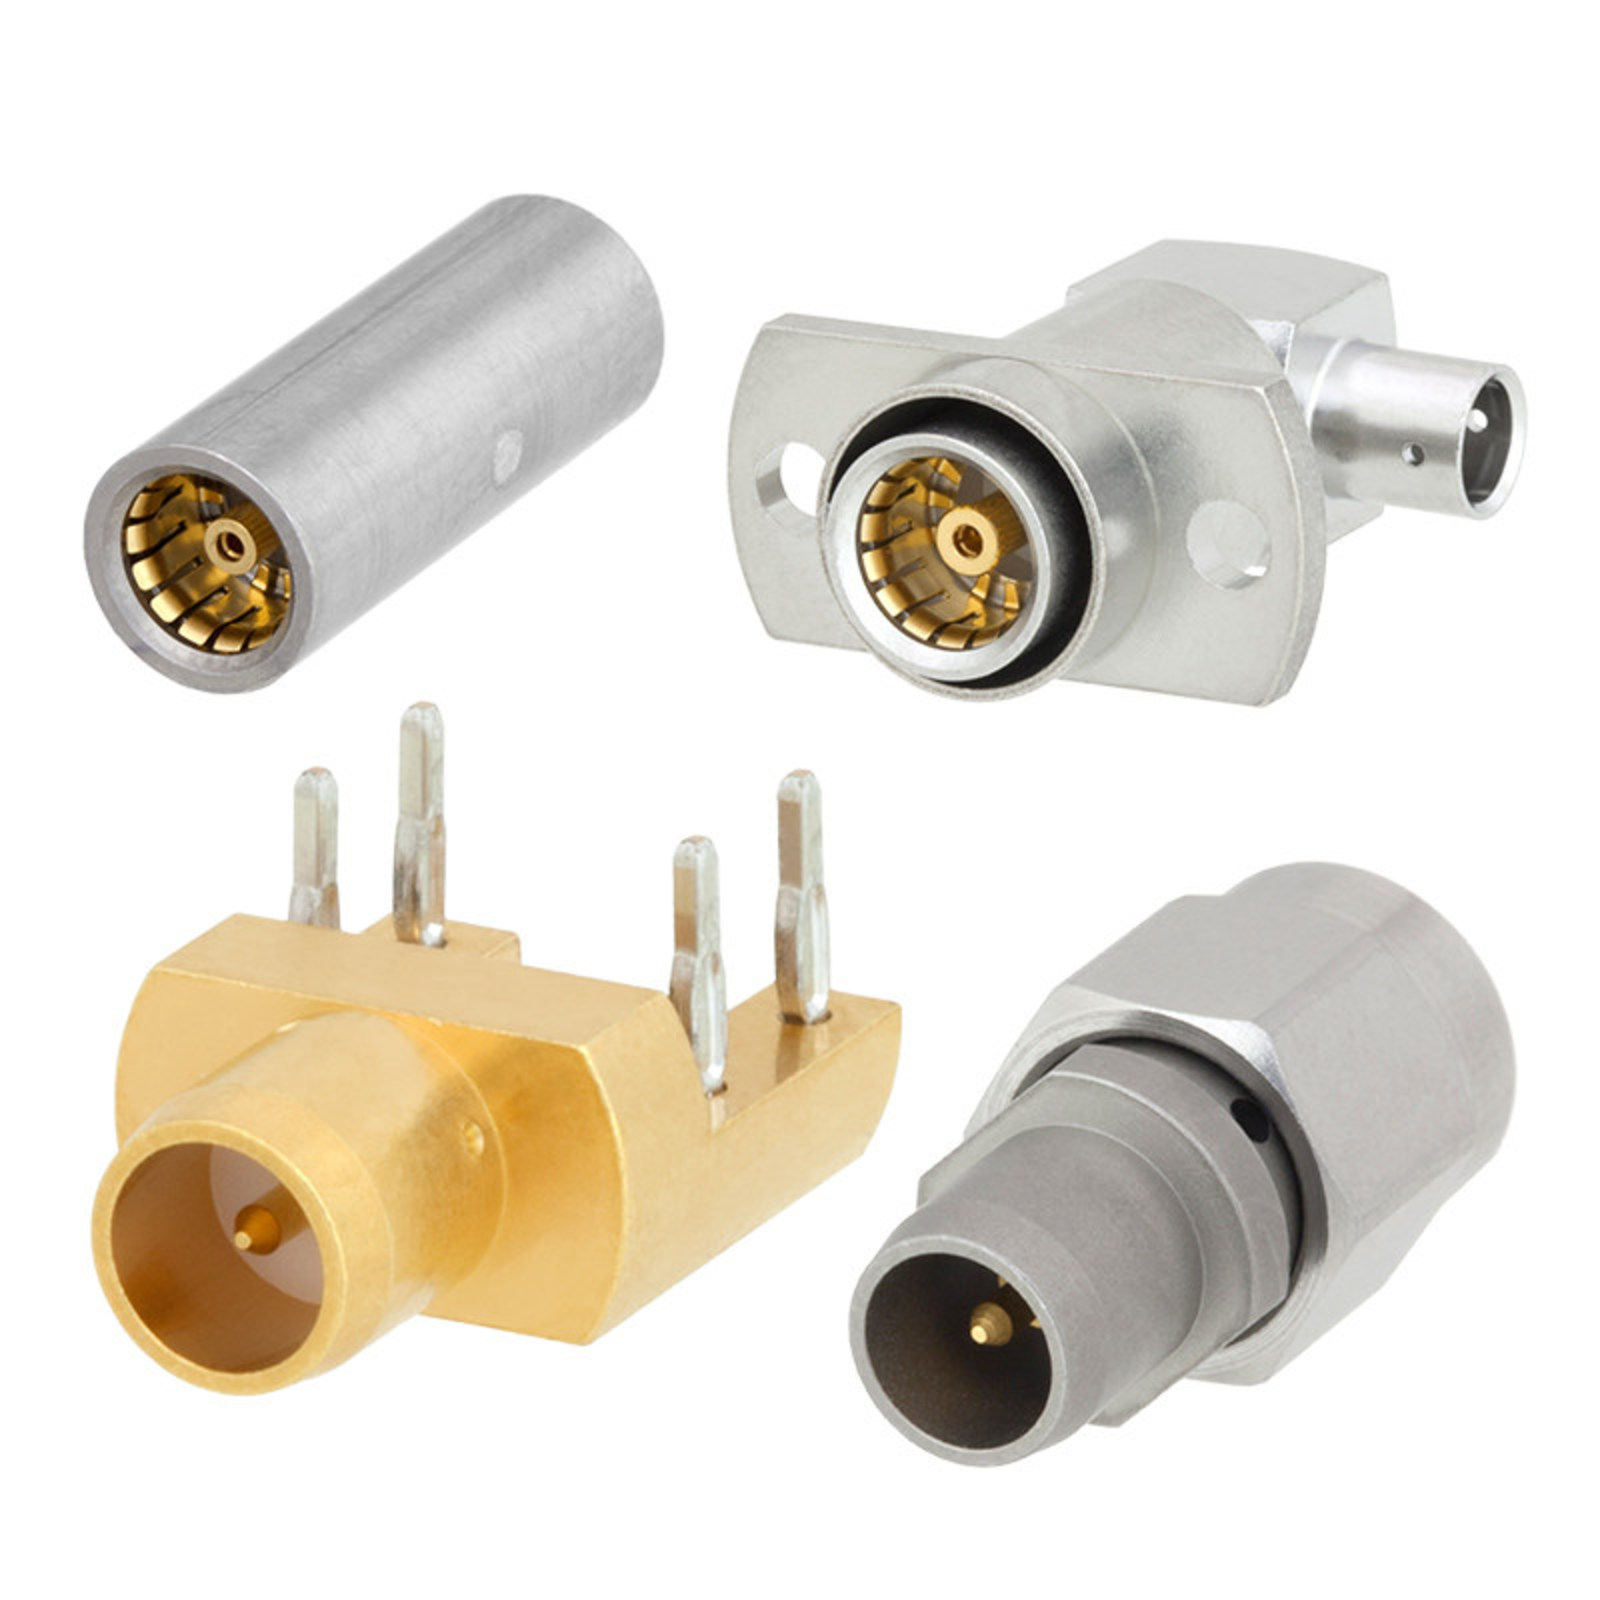 BMA Connectors and Adapters from Pasternack